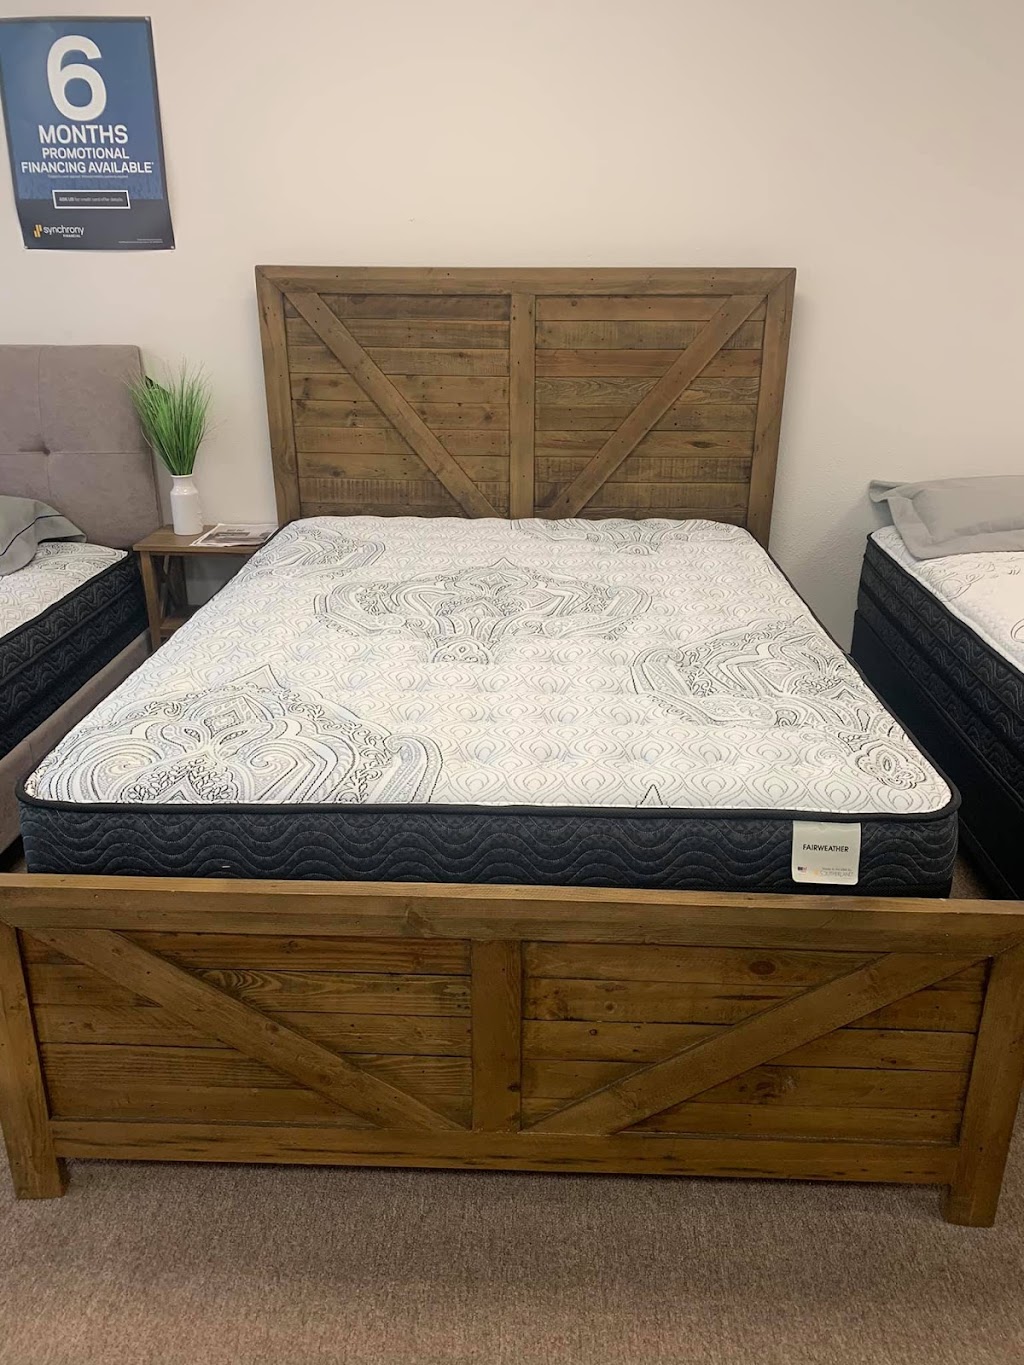 One Sleep Company, Mattress Sales By Appointment | 13704 24th St E a112, Sumner, WA 98390, USA | Phone: (253) 651-5376